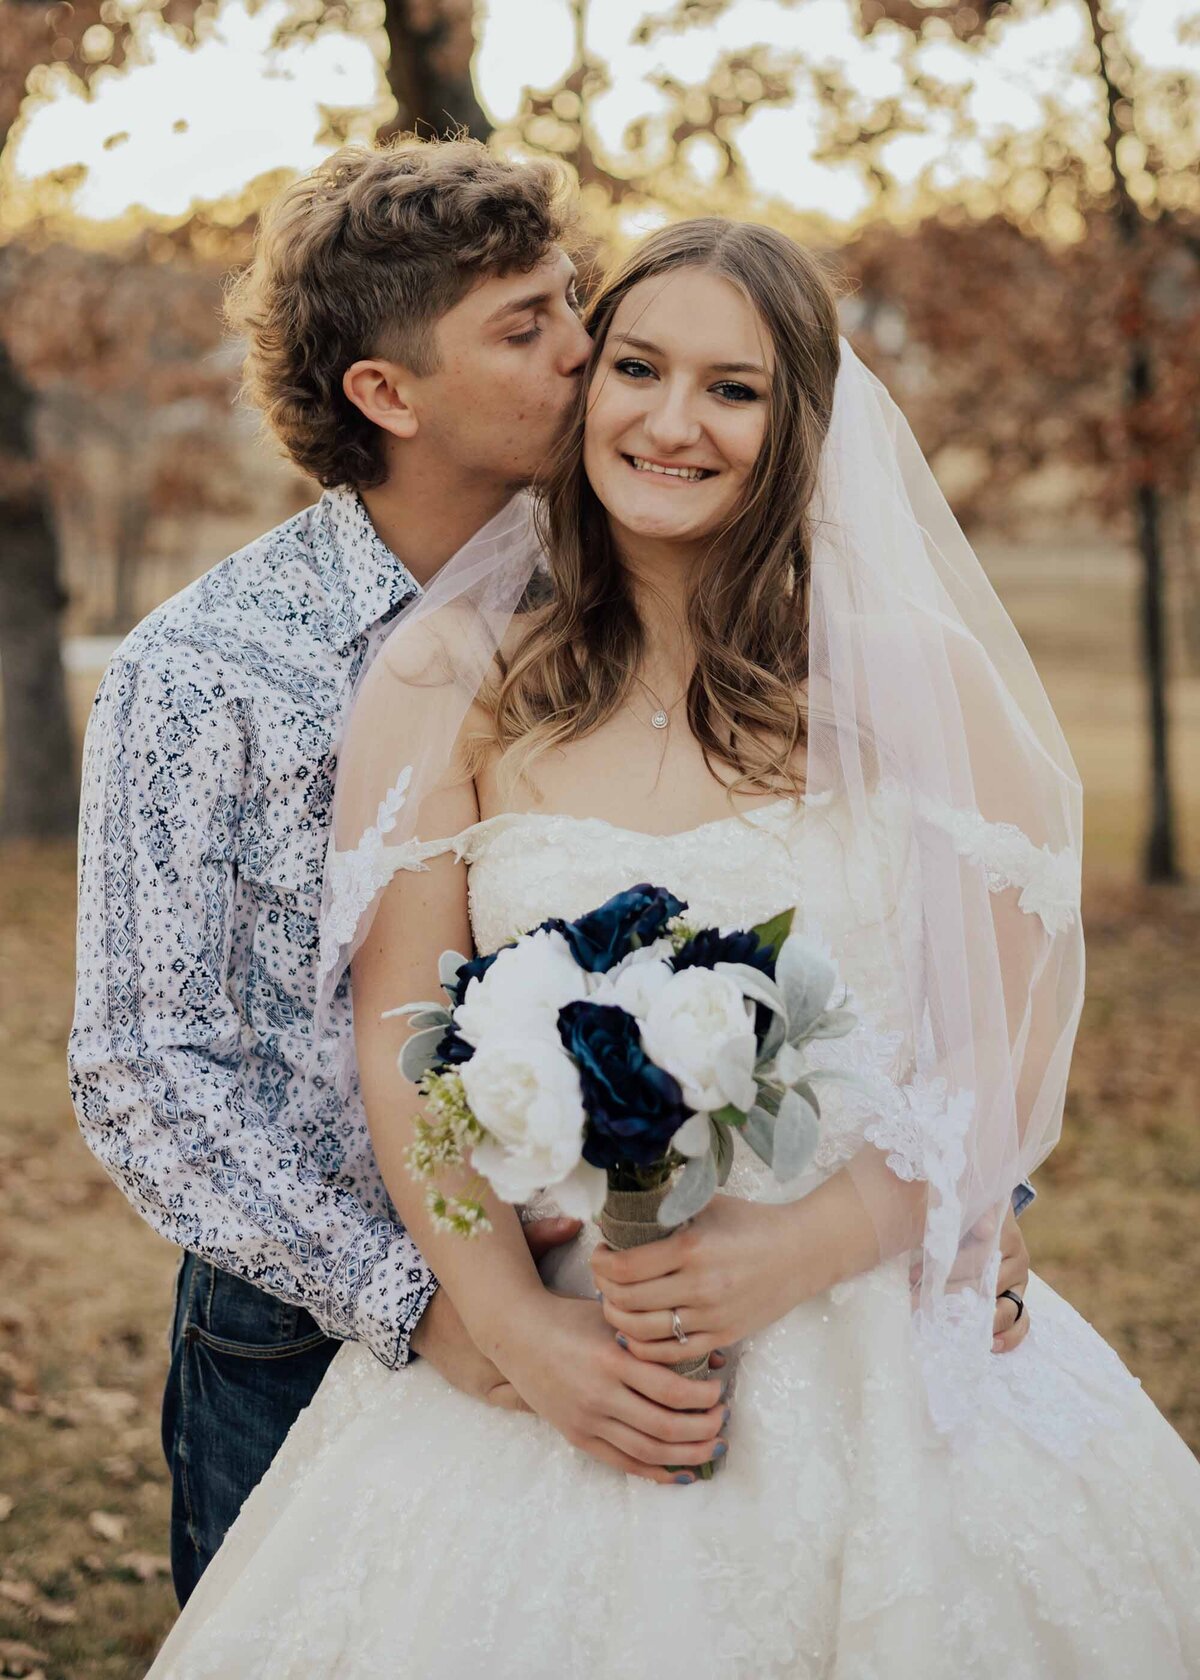 Maddie Rae Photography groom is standing behind bride with his hands on her waist. he is kissing her cheek and she is smiling at the camera holding her flowers